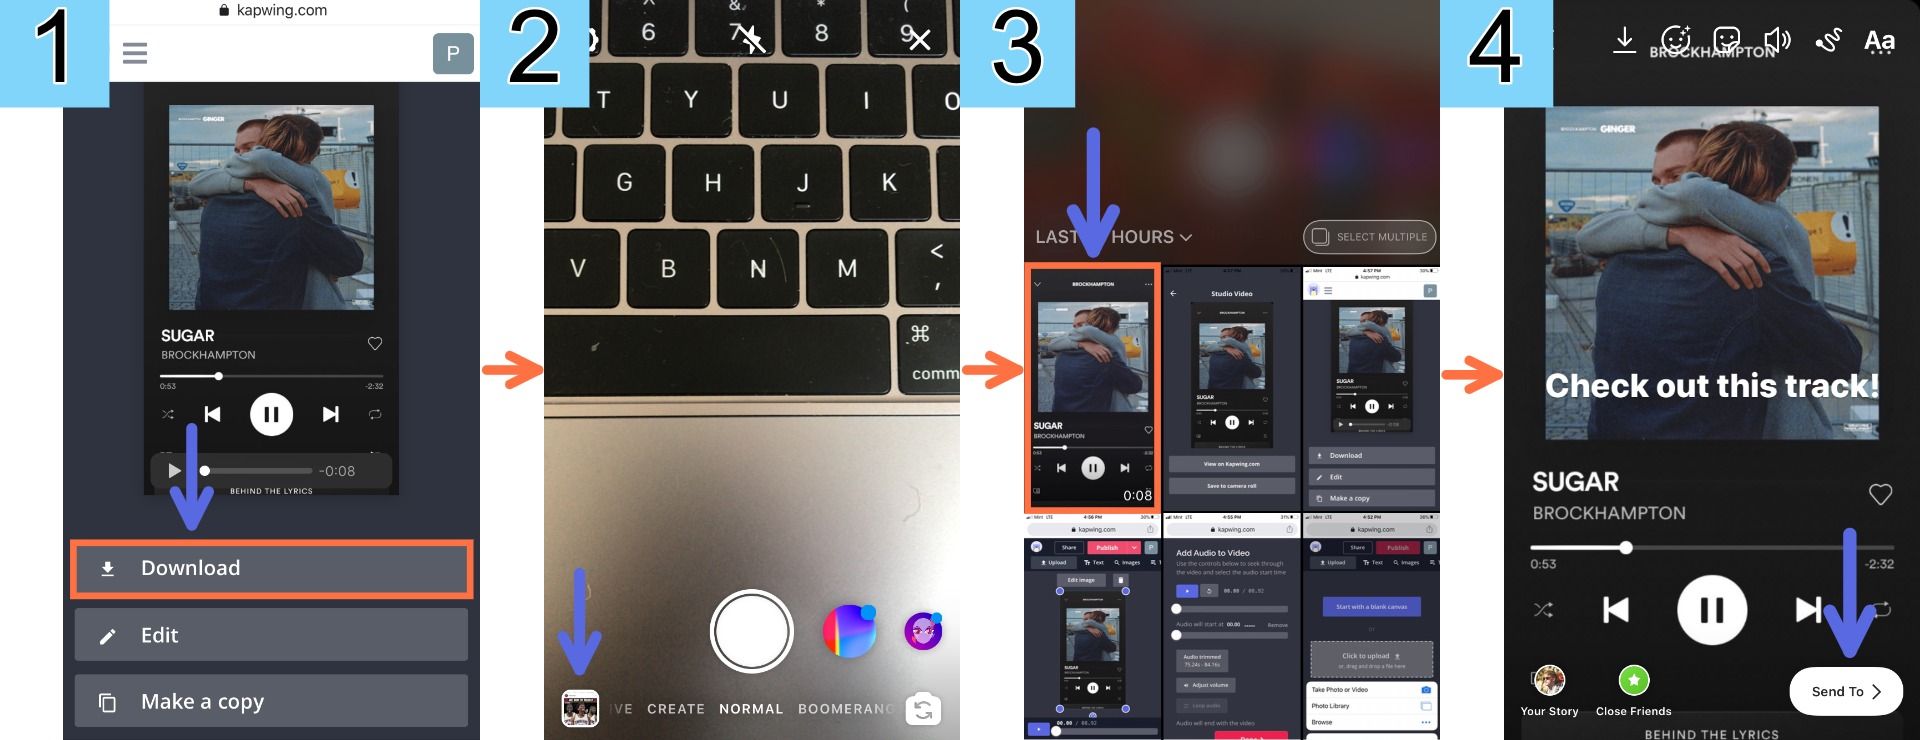 how to add to your insta story on laptop